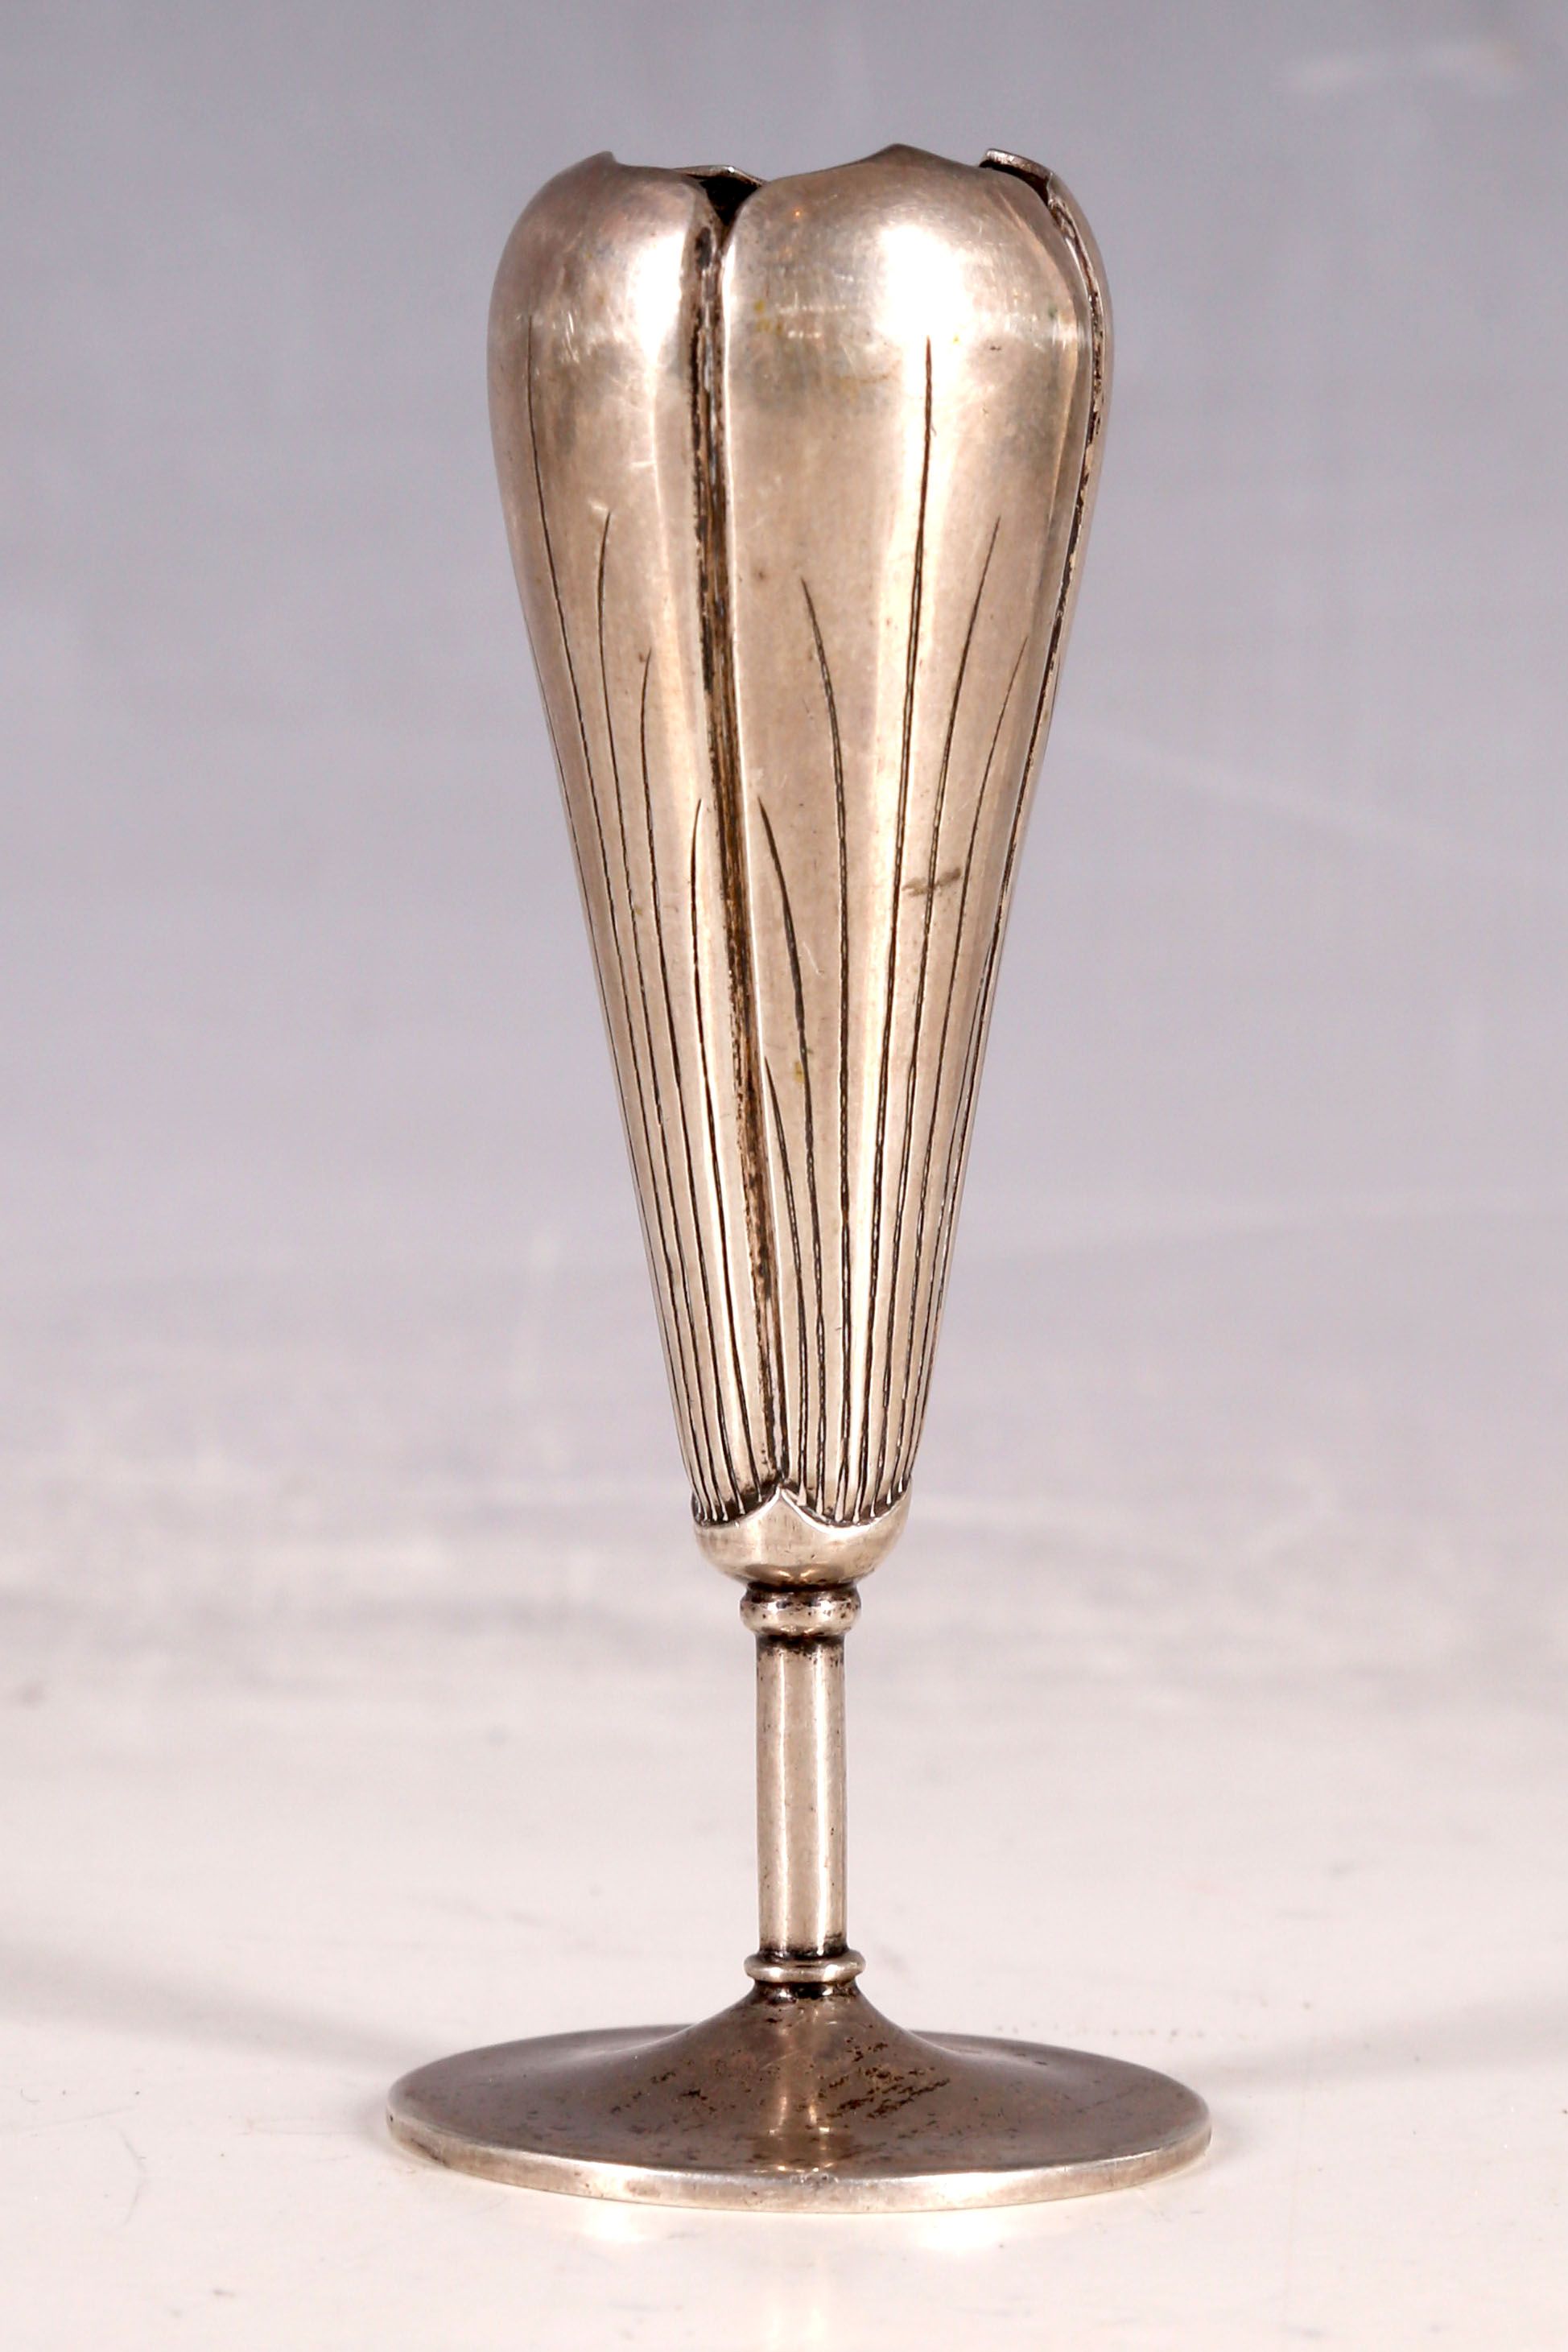 A Chinese silver crocus vase, hallmarks and character stamps to base, 8.4cm H.